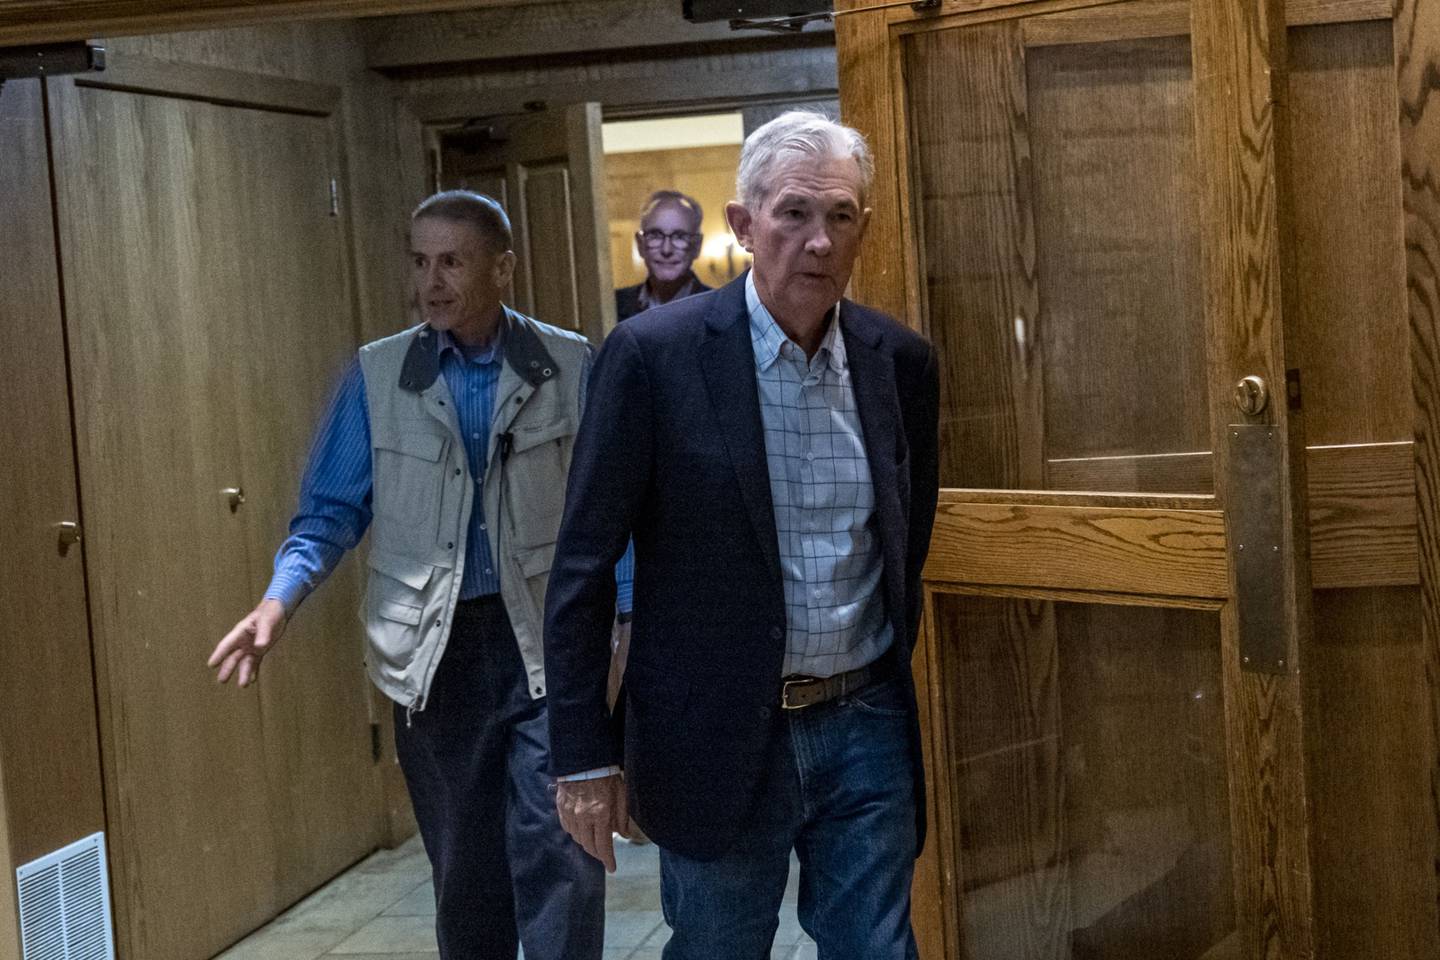 Powell leaves the reception dinner at the Jackson Hole economic symposium in Wyoming, on Aug. 25. dfd